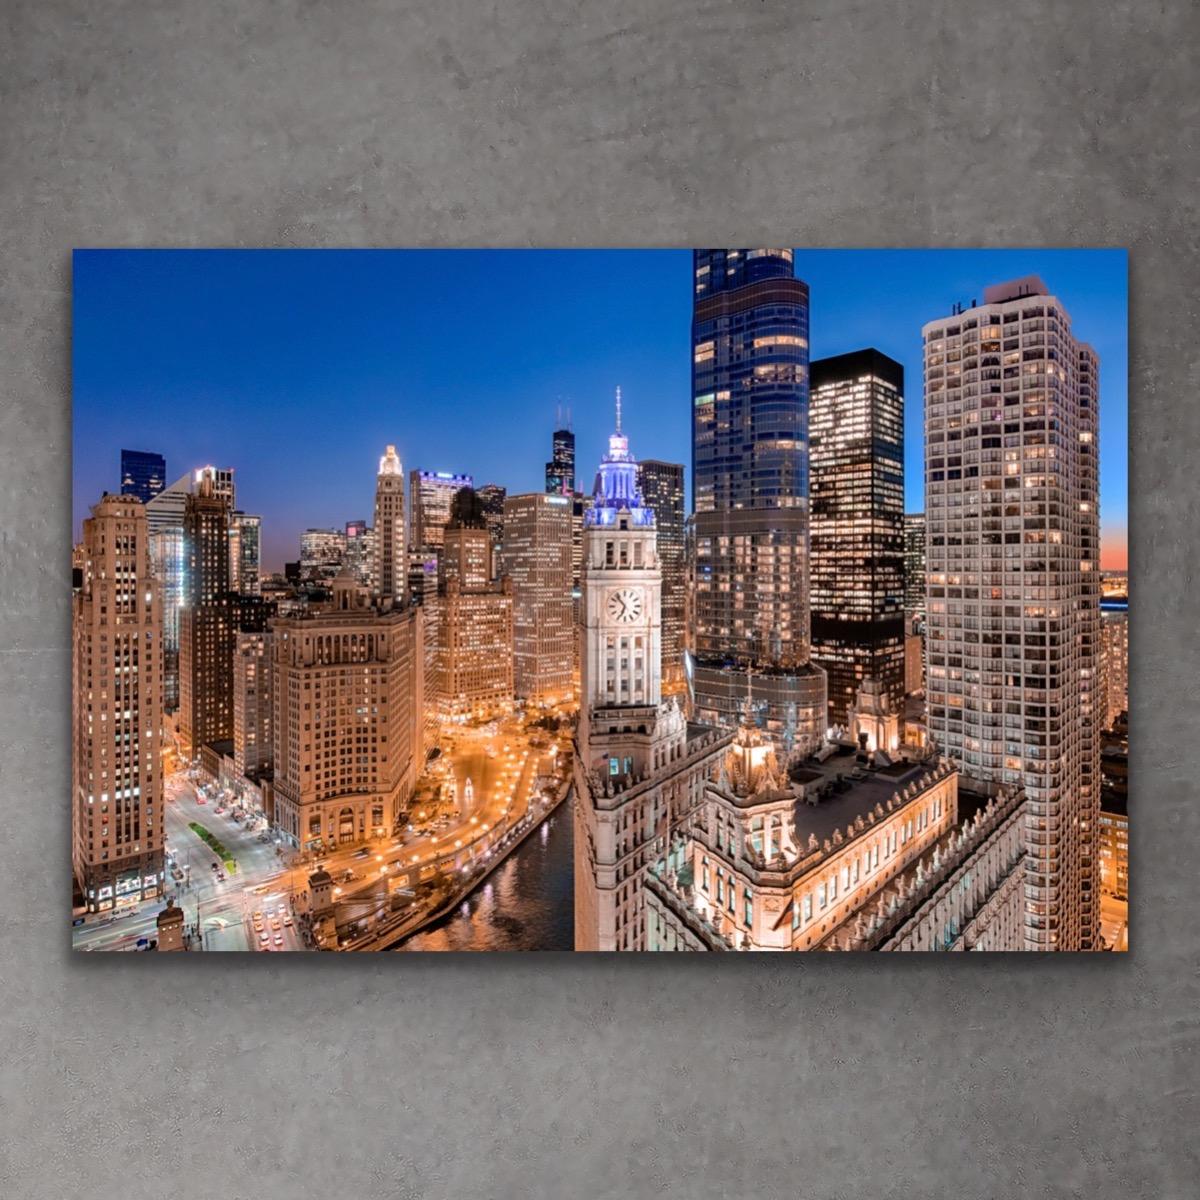 Aerial Photography, Chicago's Wacker Drive, Giclee on Metal, by Scott F. - Gray Landscape Print by Scott F. 